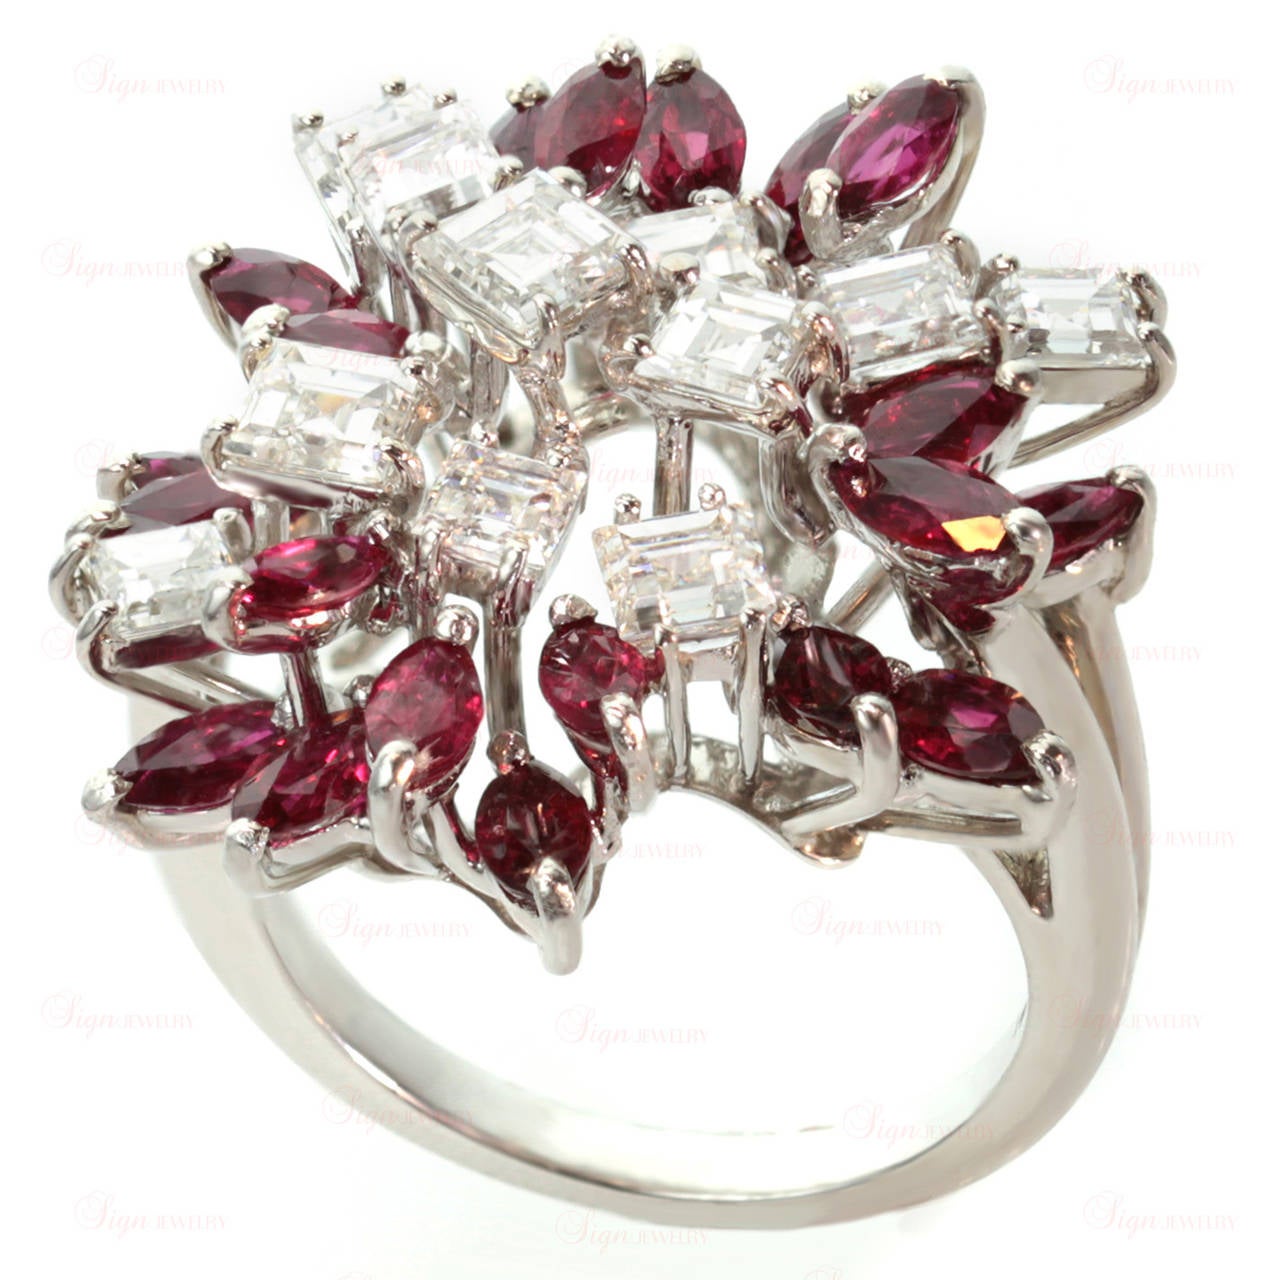 This elegant estate ring features a floral cluster of 20 marquise-cut faceted 2.0mm rubies and 11 square-cut diamonds beautifully prong-set into 18k white gold. Measurements: 0.98